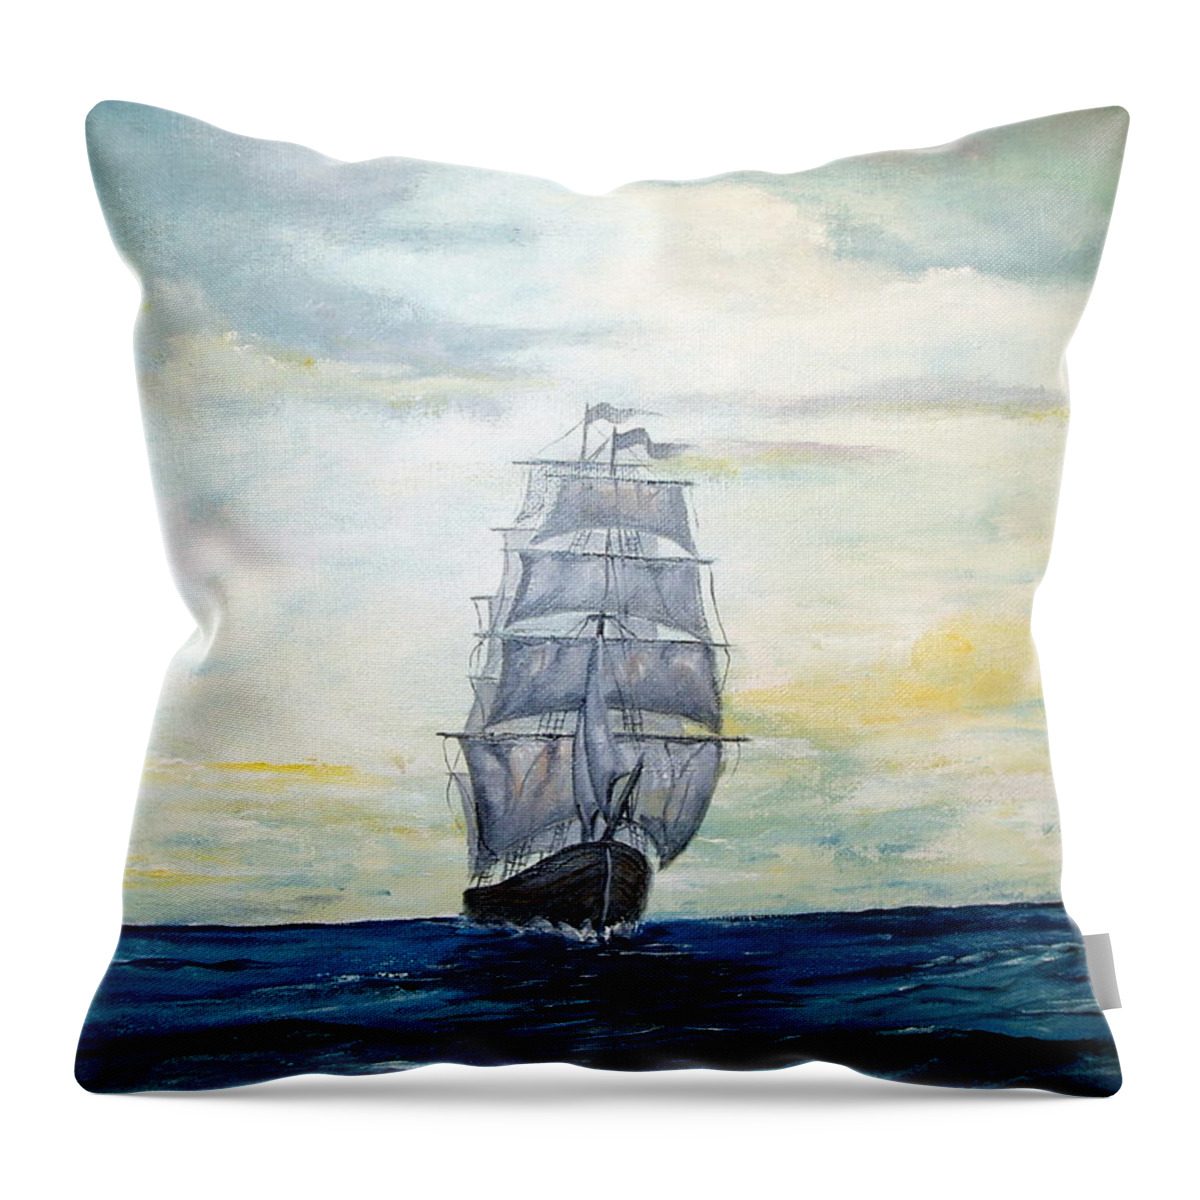 Lee Piper Throw Pillow featuring the painting Morning Light On The Atlantic by Lee Piper